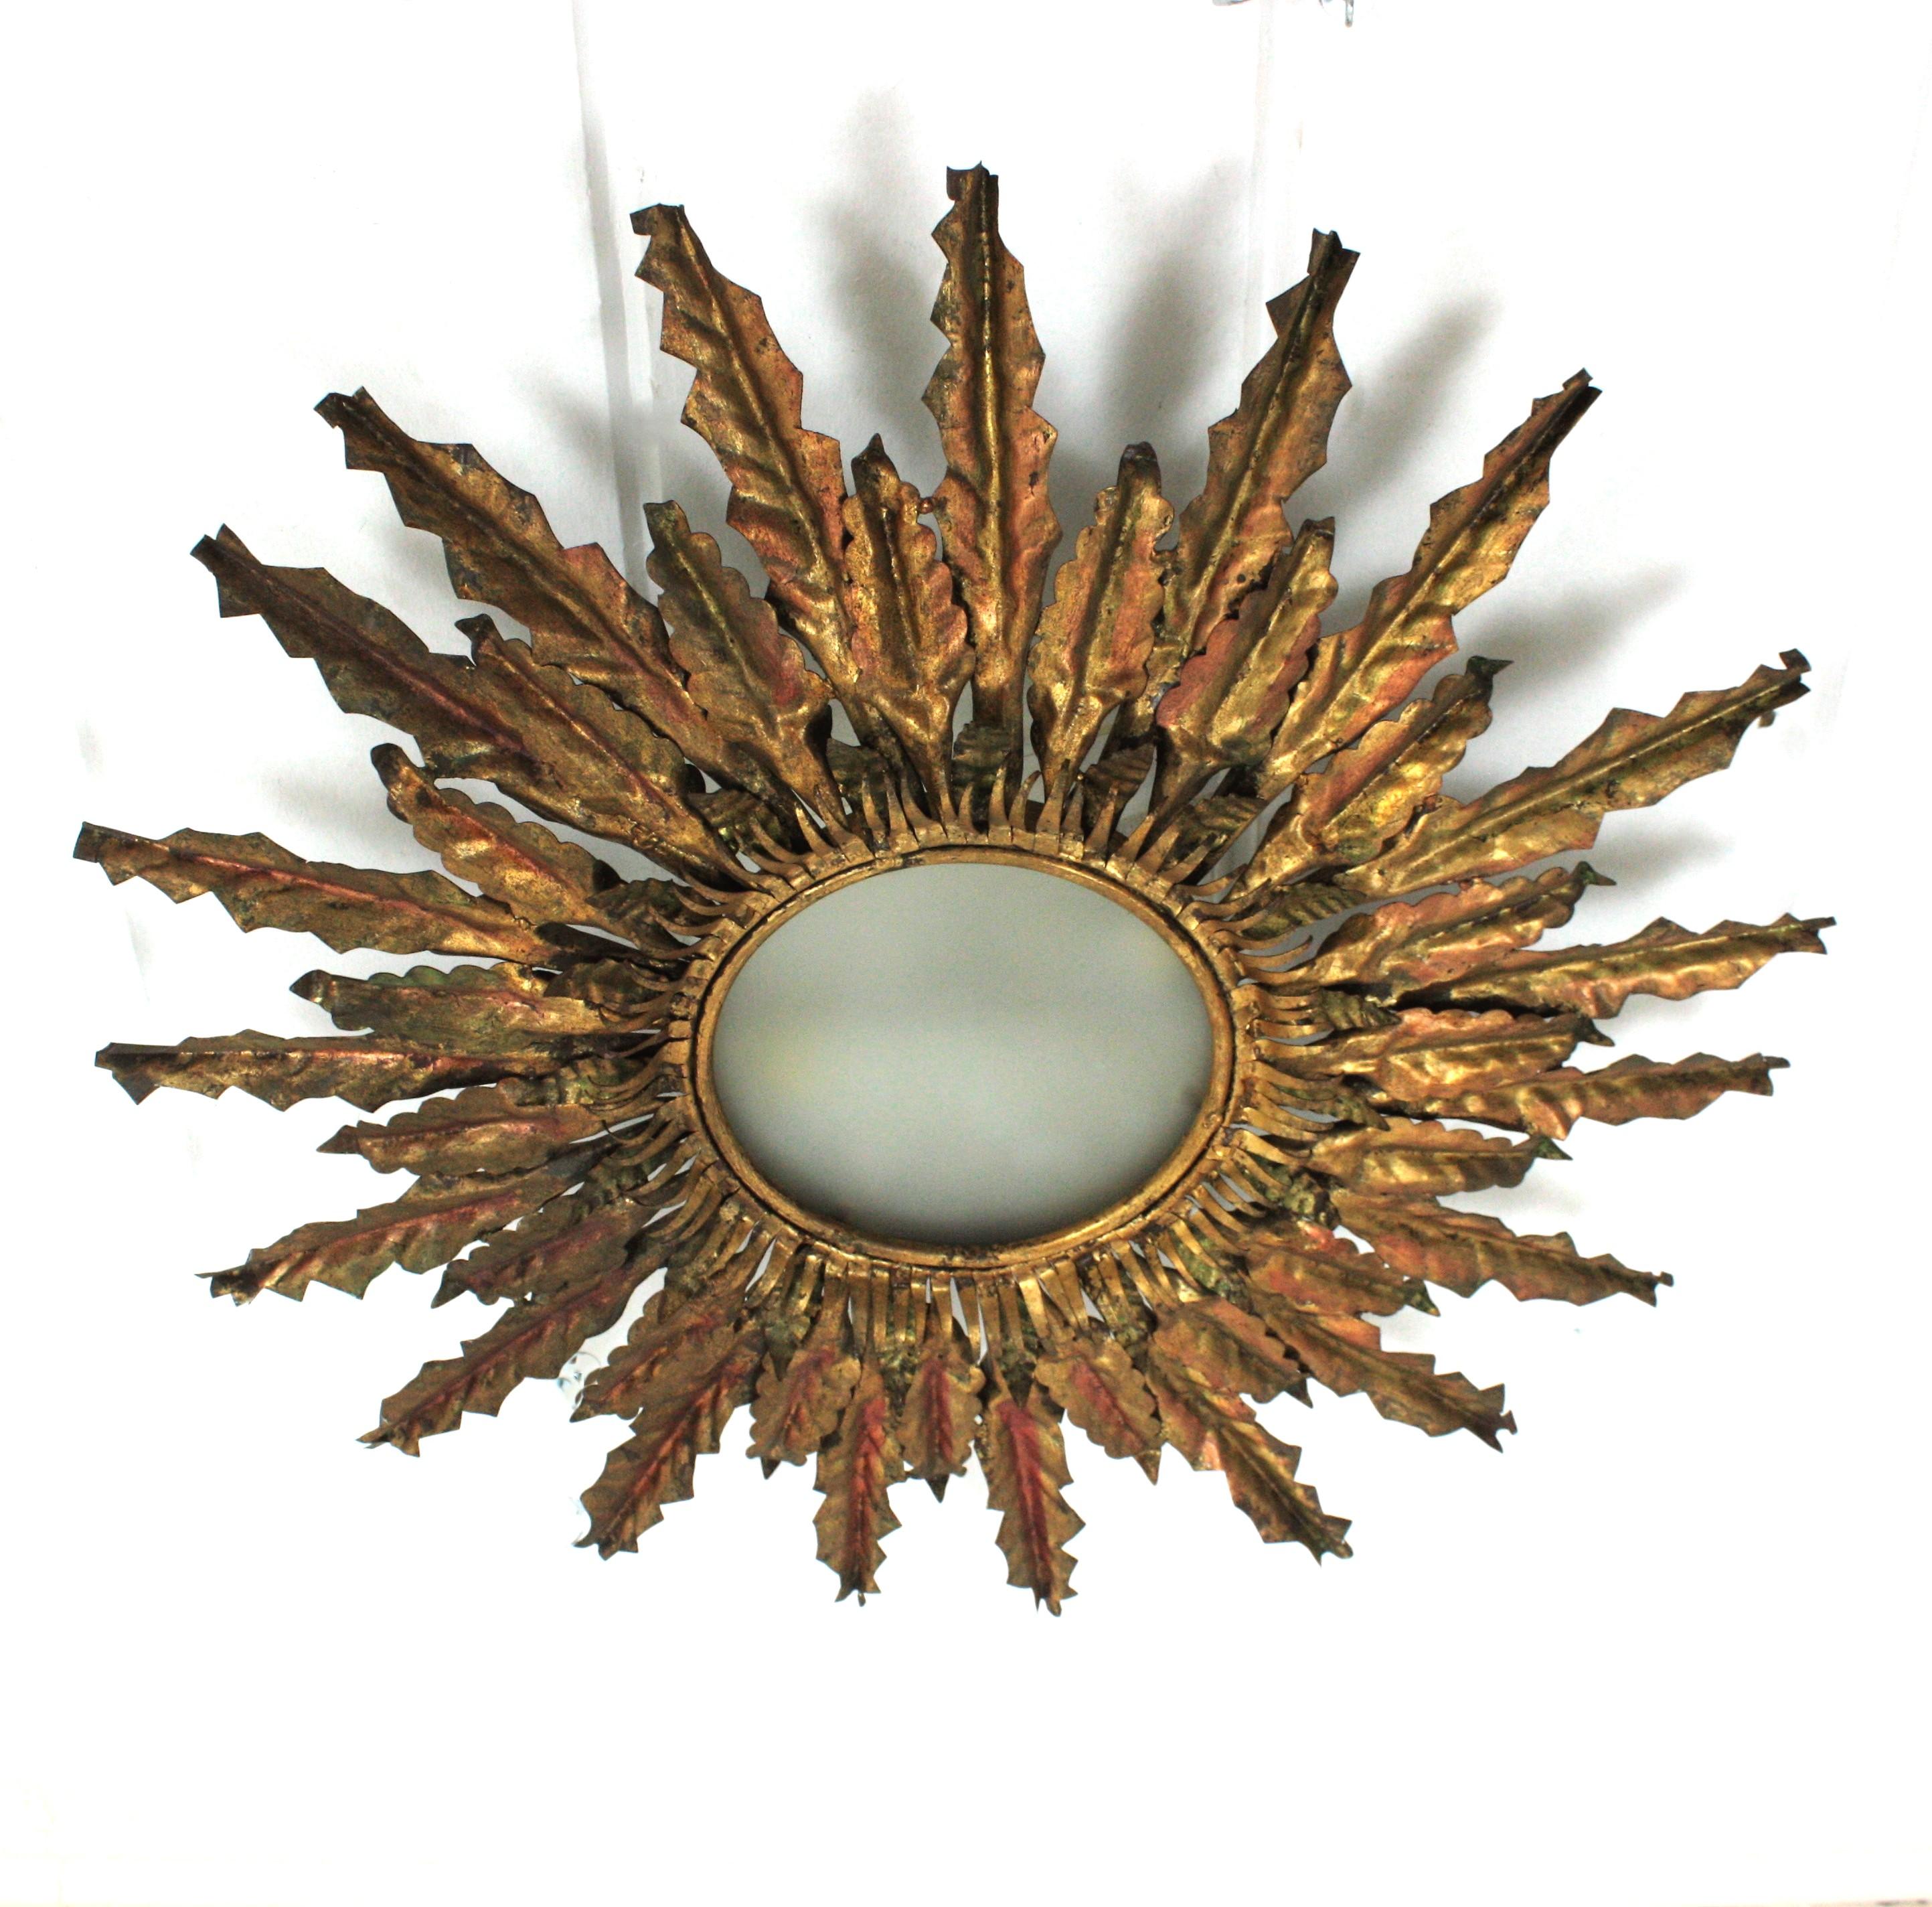 Monumental richly decorated extra large (35 in) hand hammered gold gilt iron sunburst light fixture. Spain, 1940s. 
It has double set of leaves in two sizes around a corolla with small leaves surrounding a central frosted glass light diffuser. 
The